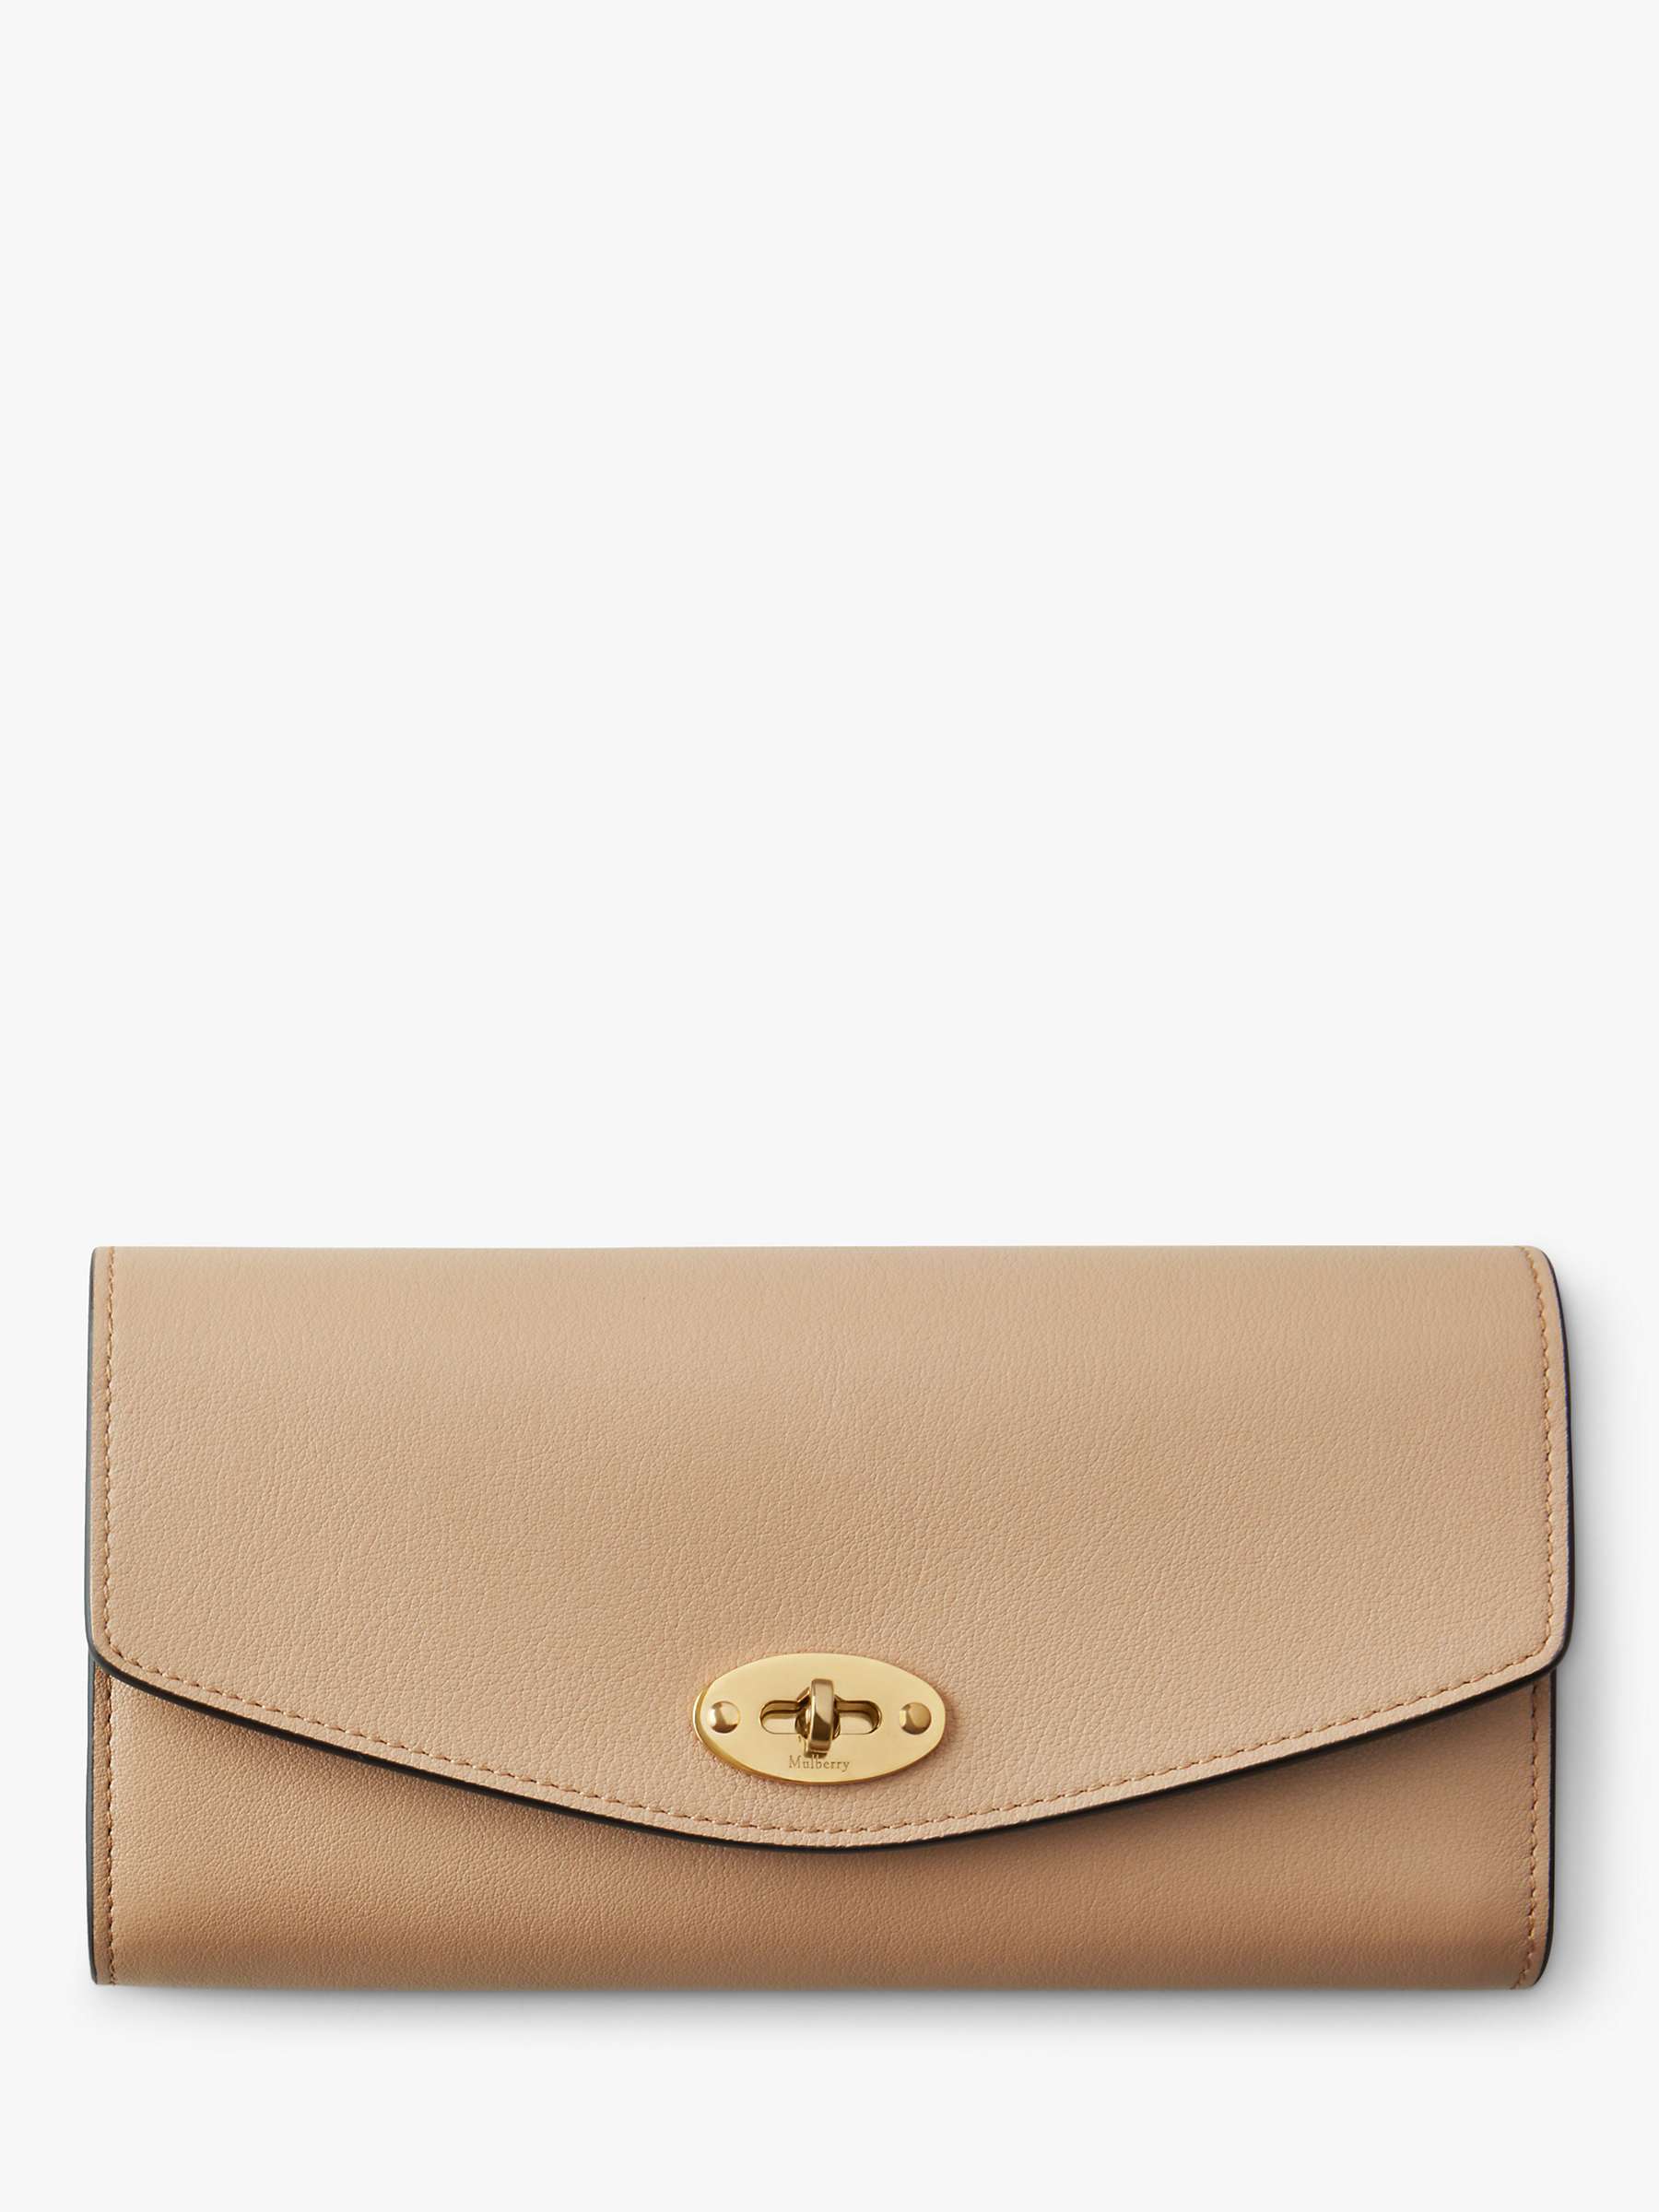 Buy Mulberry Darley Silky Calf Leather Wallet, Maple Online at johnlewis.com